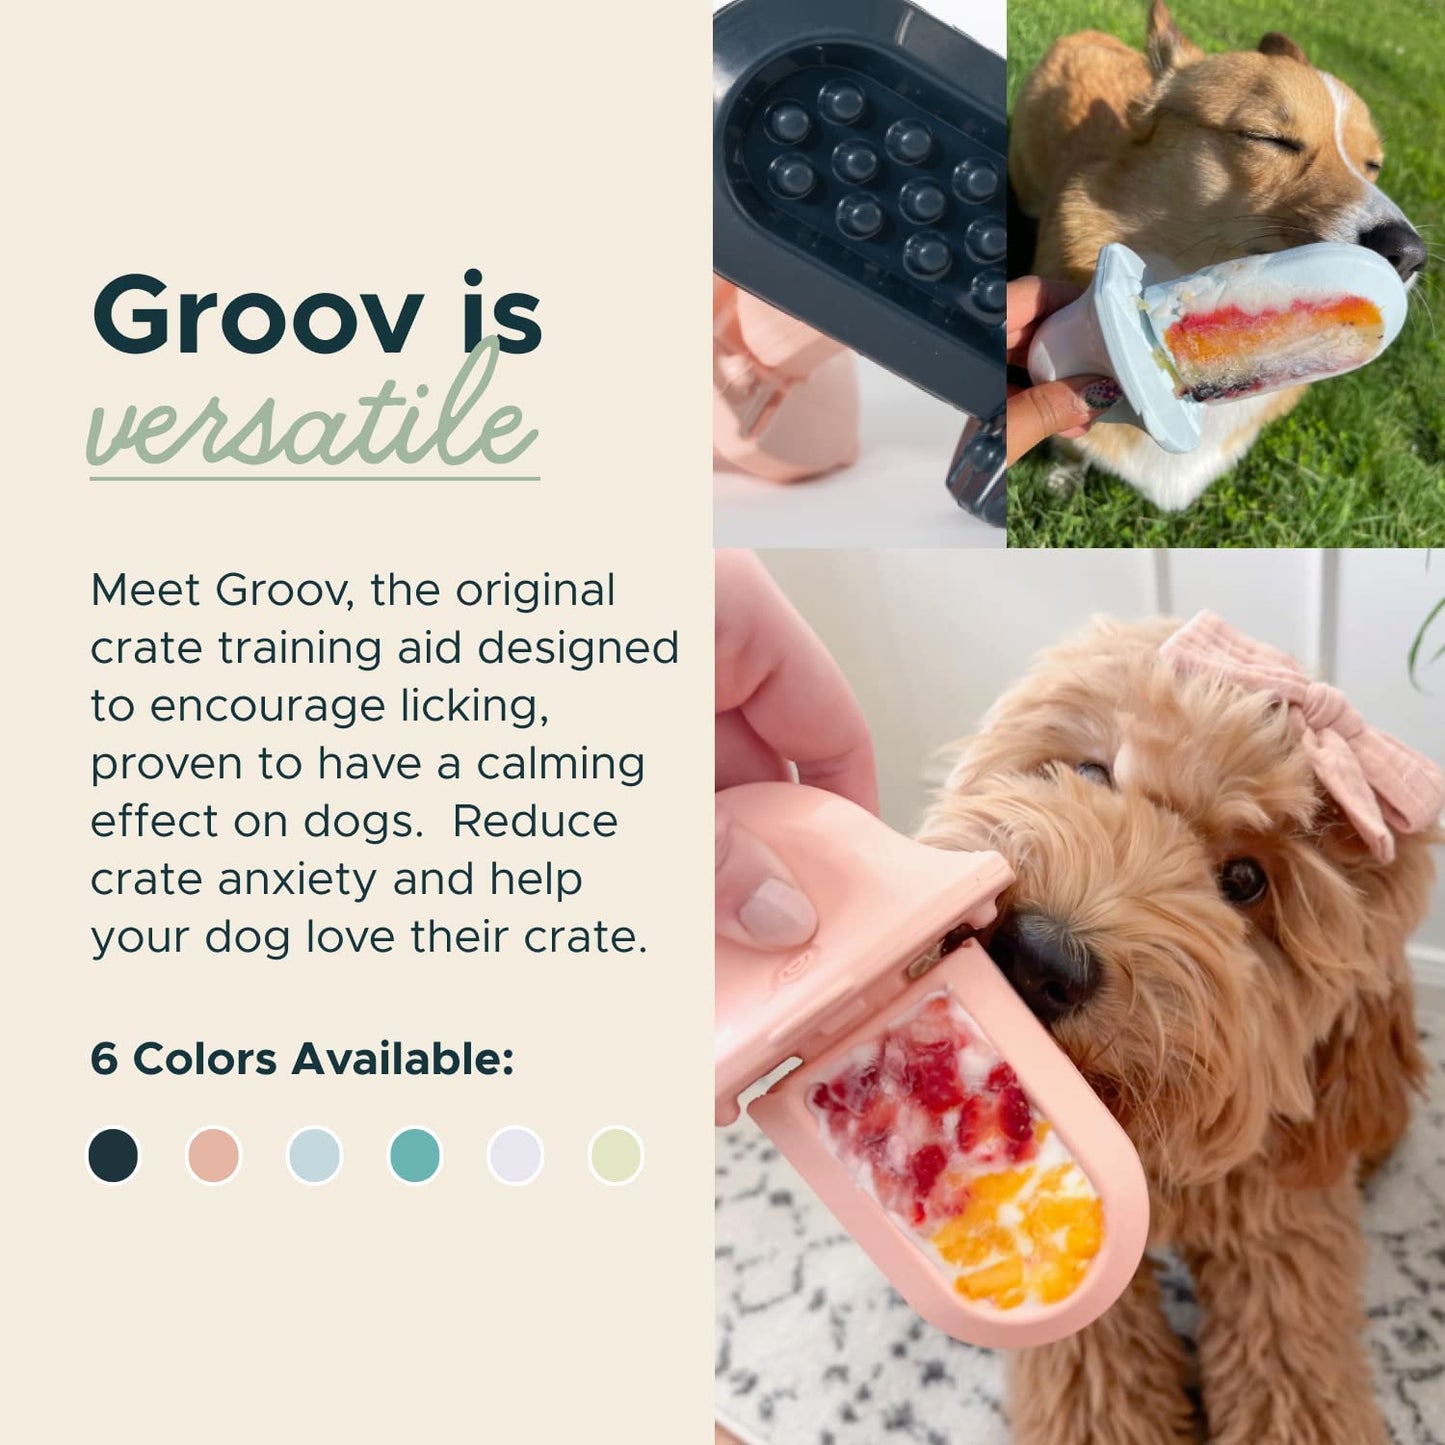 Groov Dog Training Toy I Puppy Training Aid I Crate Training Aids for Puppies I Attaches to Crate I Reduces Anxiety I Dog Treat Dispenser I Dog Kennel Toys I Navy